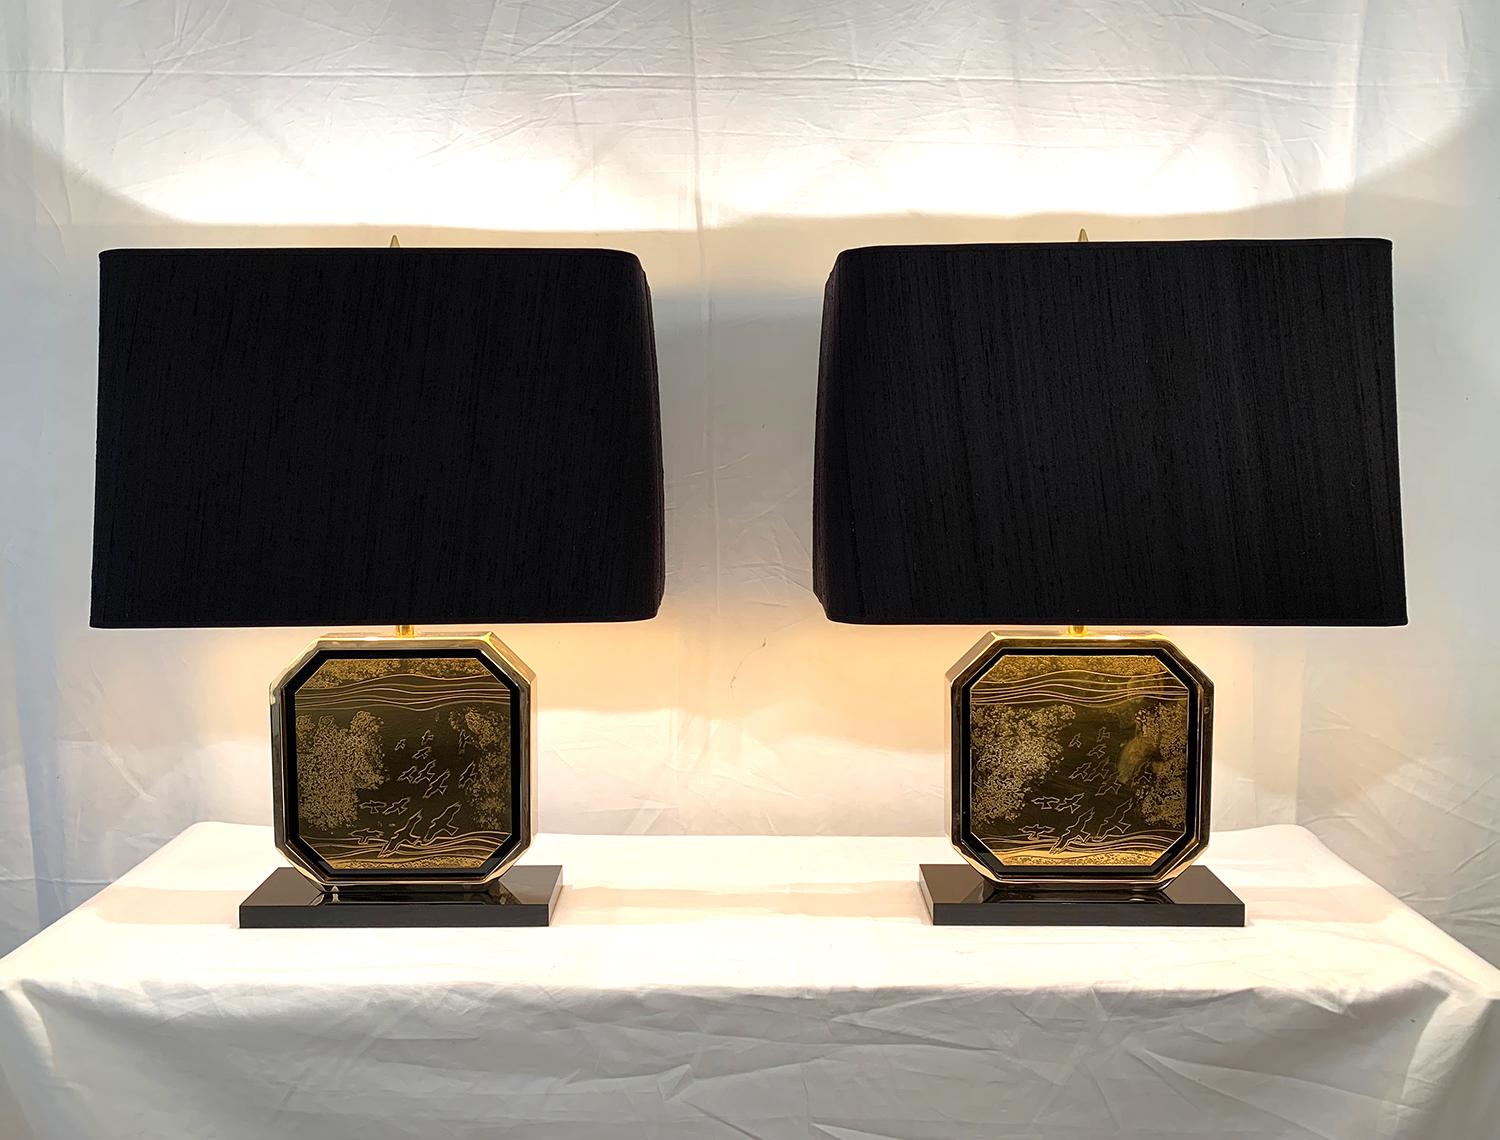 Fabulous pair of table lamps in 24-carat gold, brass and black Lucite designed by Georges Mathias in the 1970s. The lamps are signed and numbered 115 and 116 on 250. The lamp is signed 